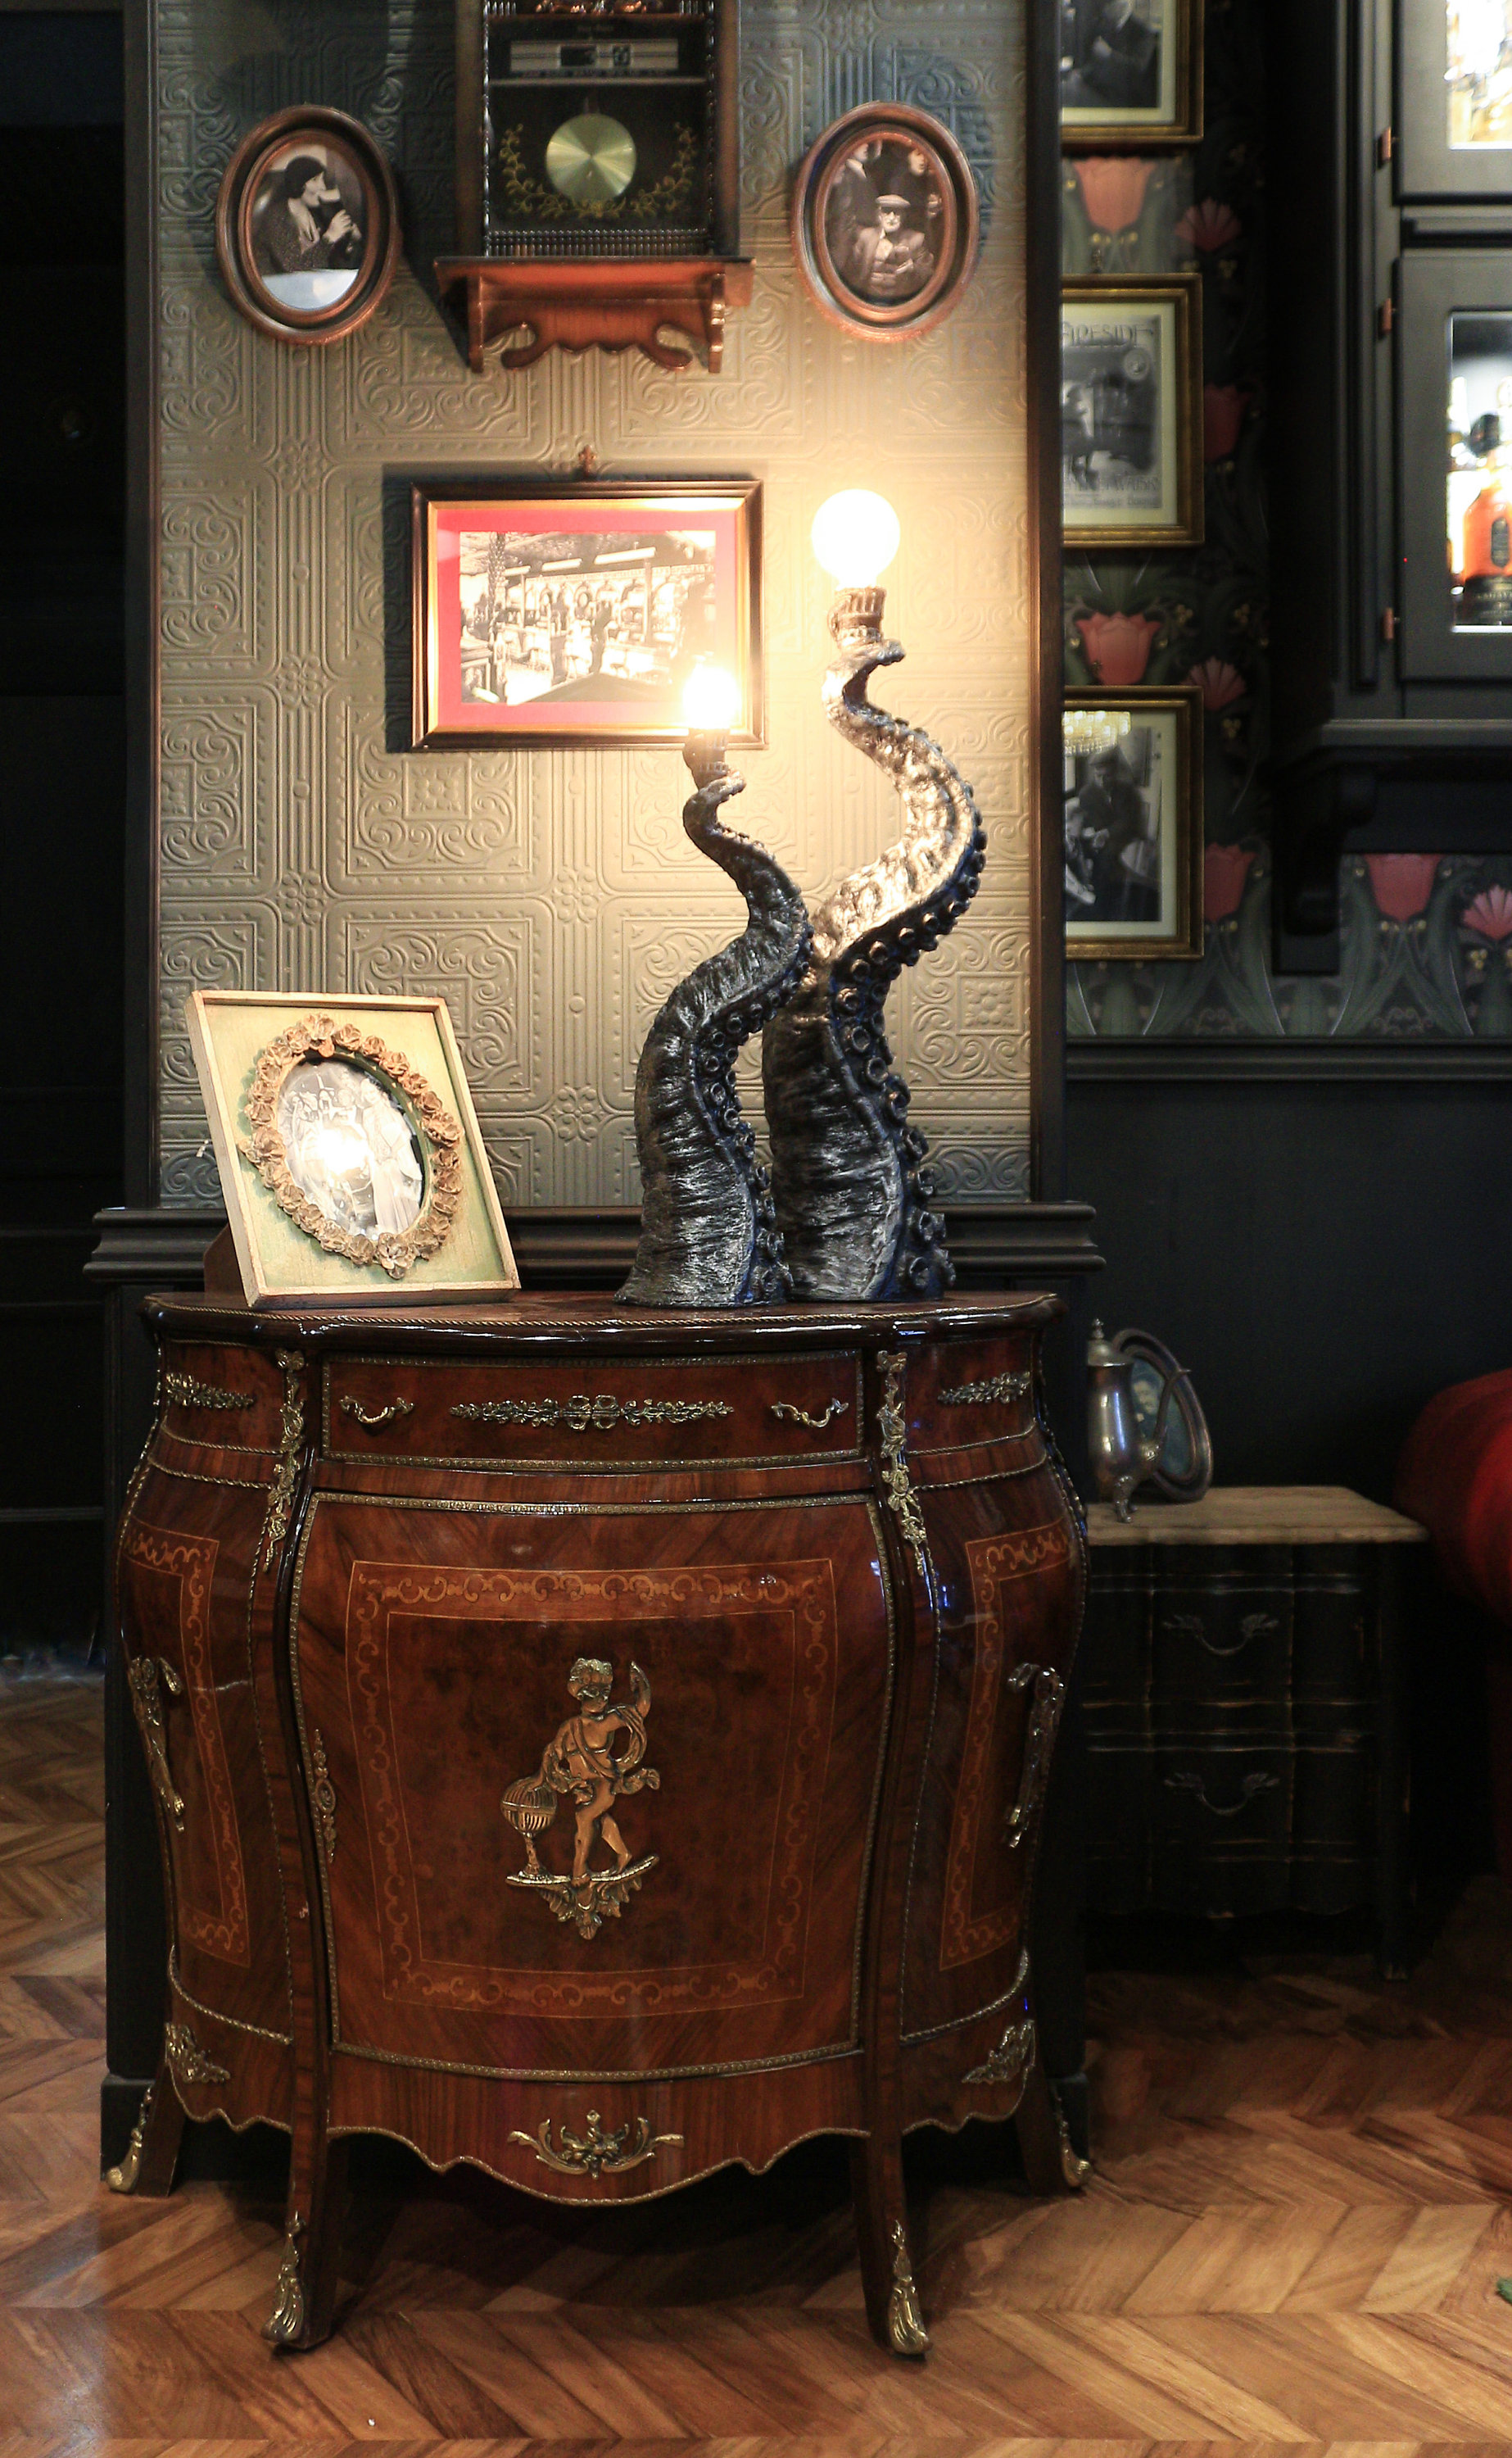 Magic Touch Octopus Tentacle Cthulhu Mythos Fantasy Steampunk lamp